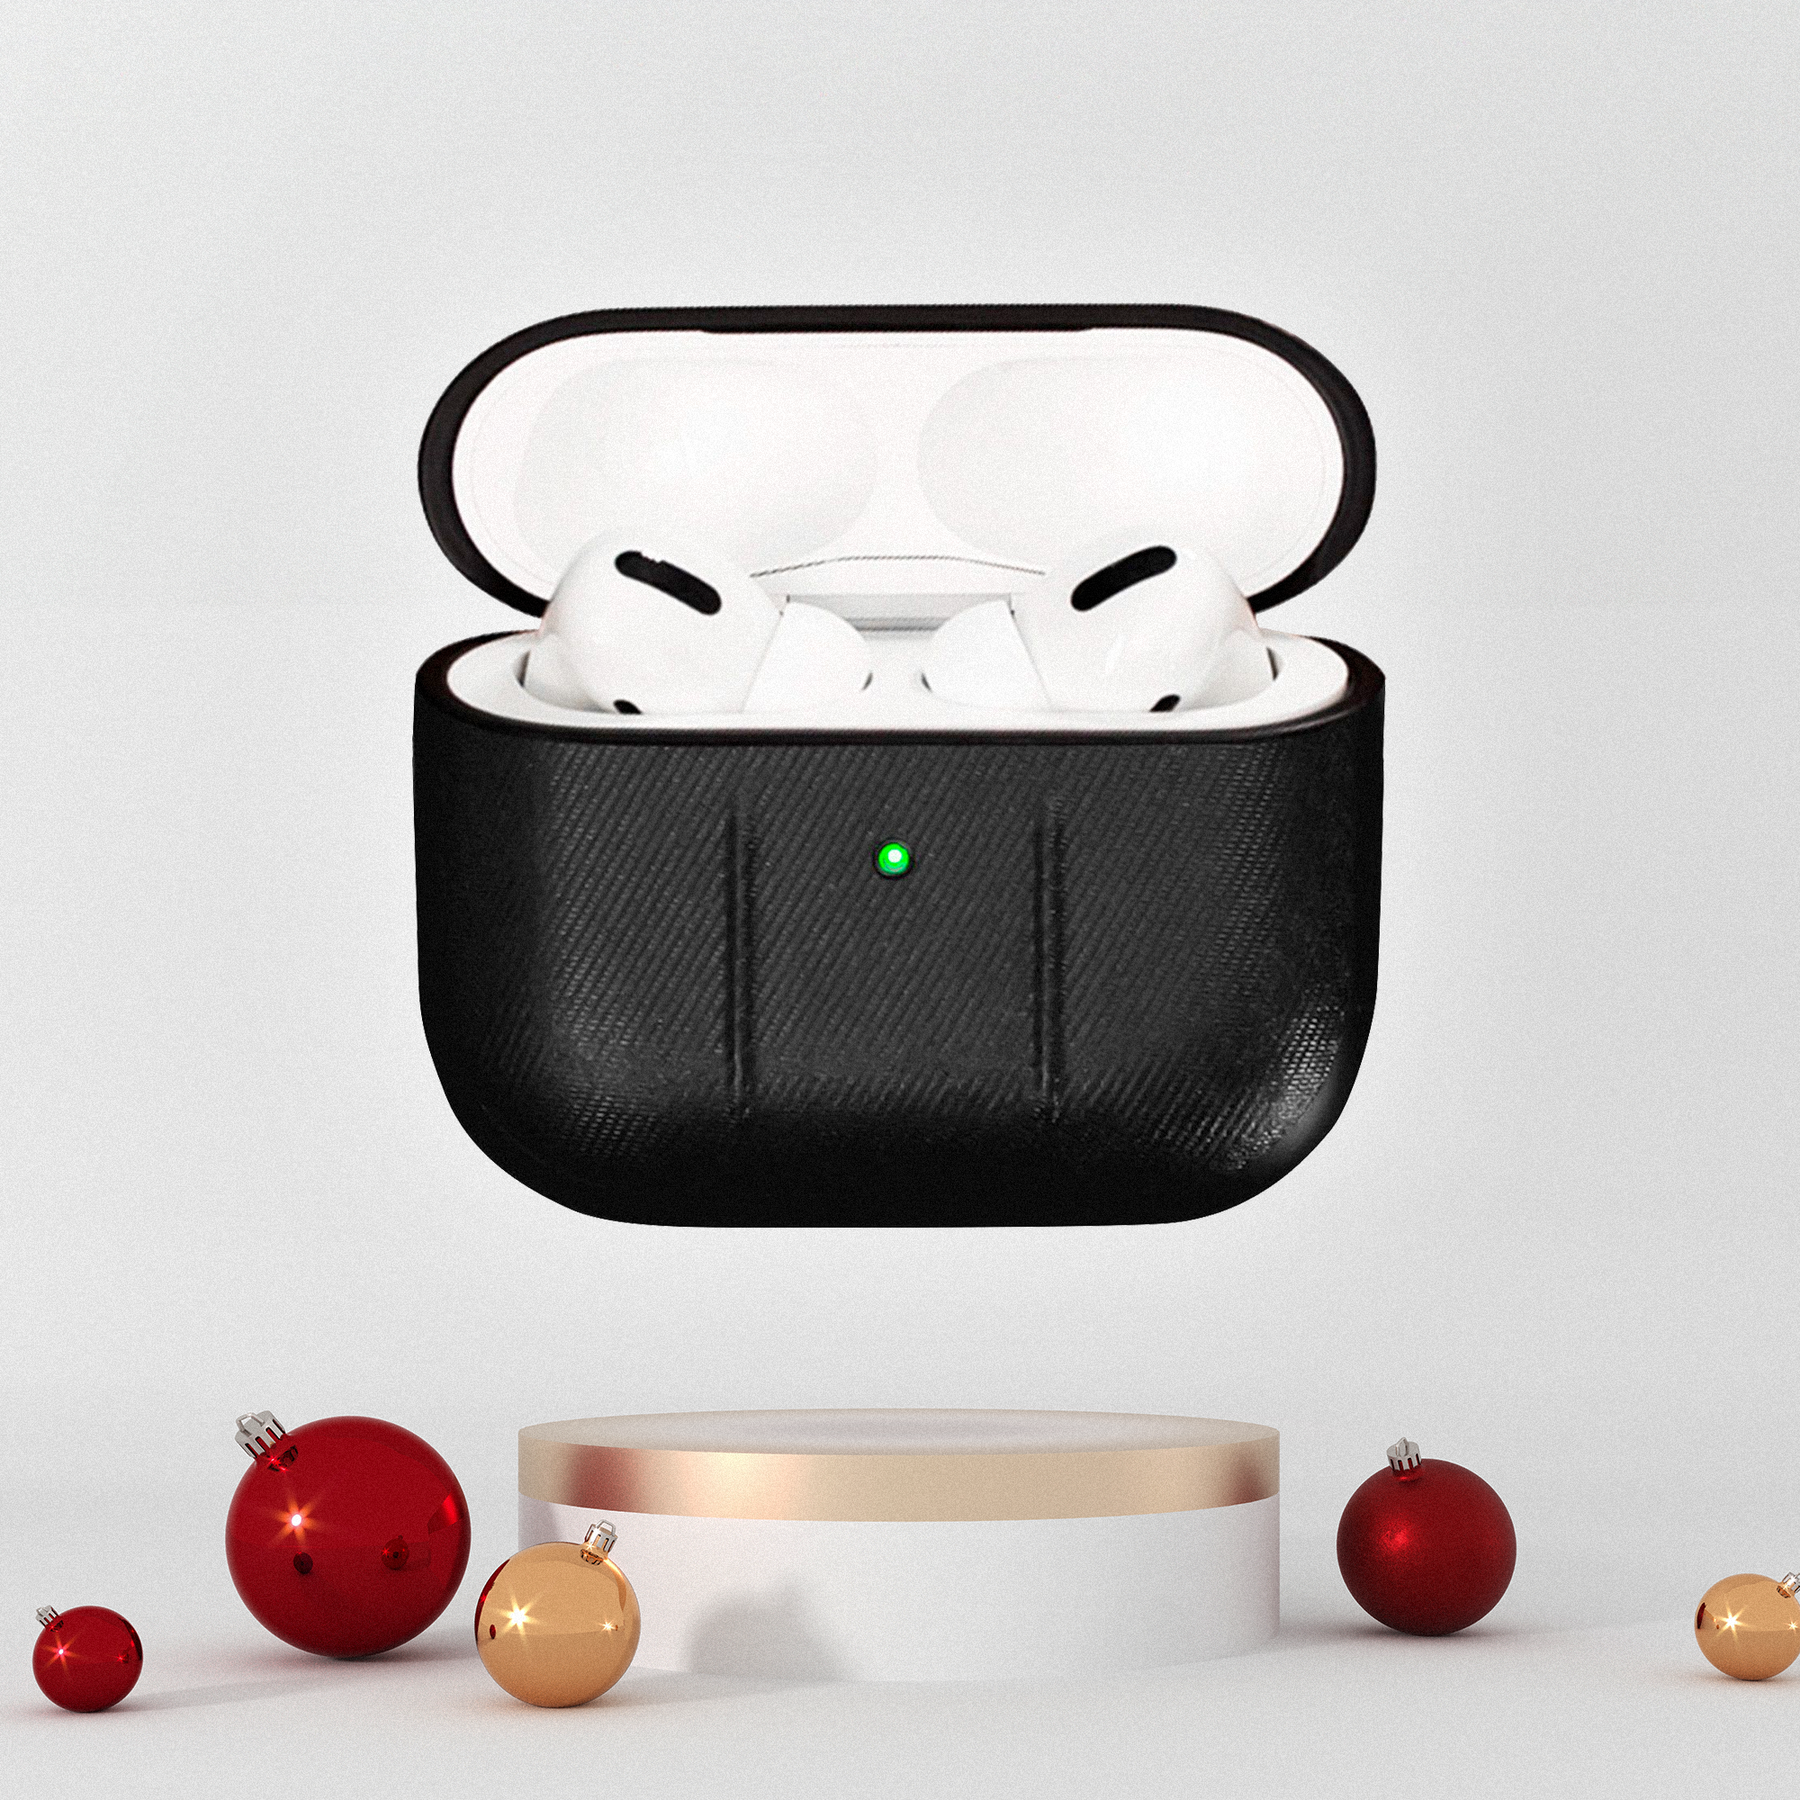 Urban AirPods Case | Holiday Specials 2023